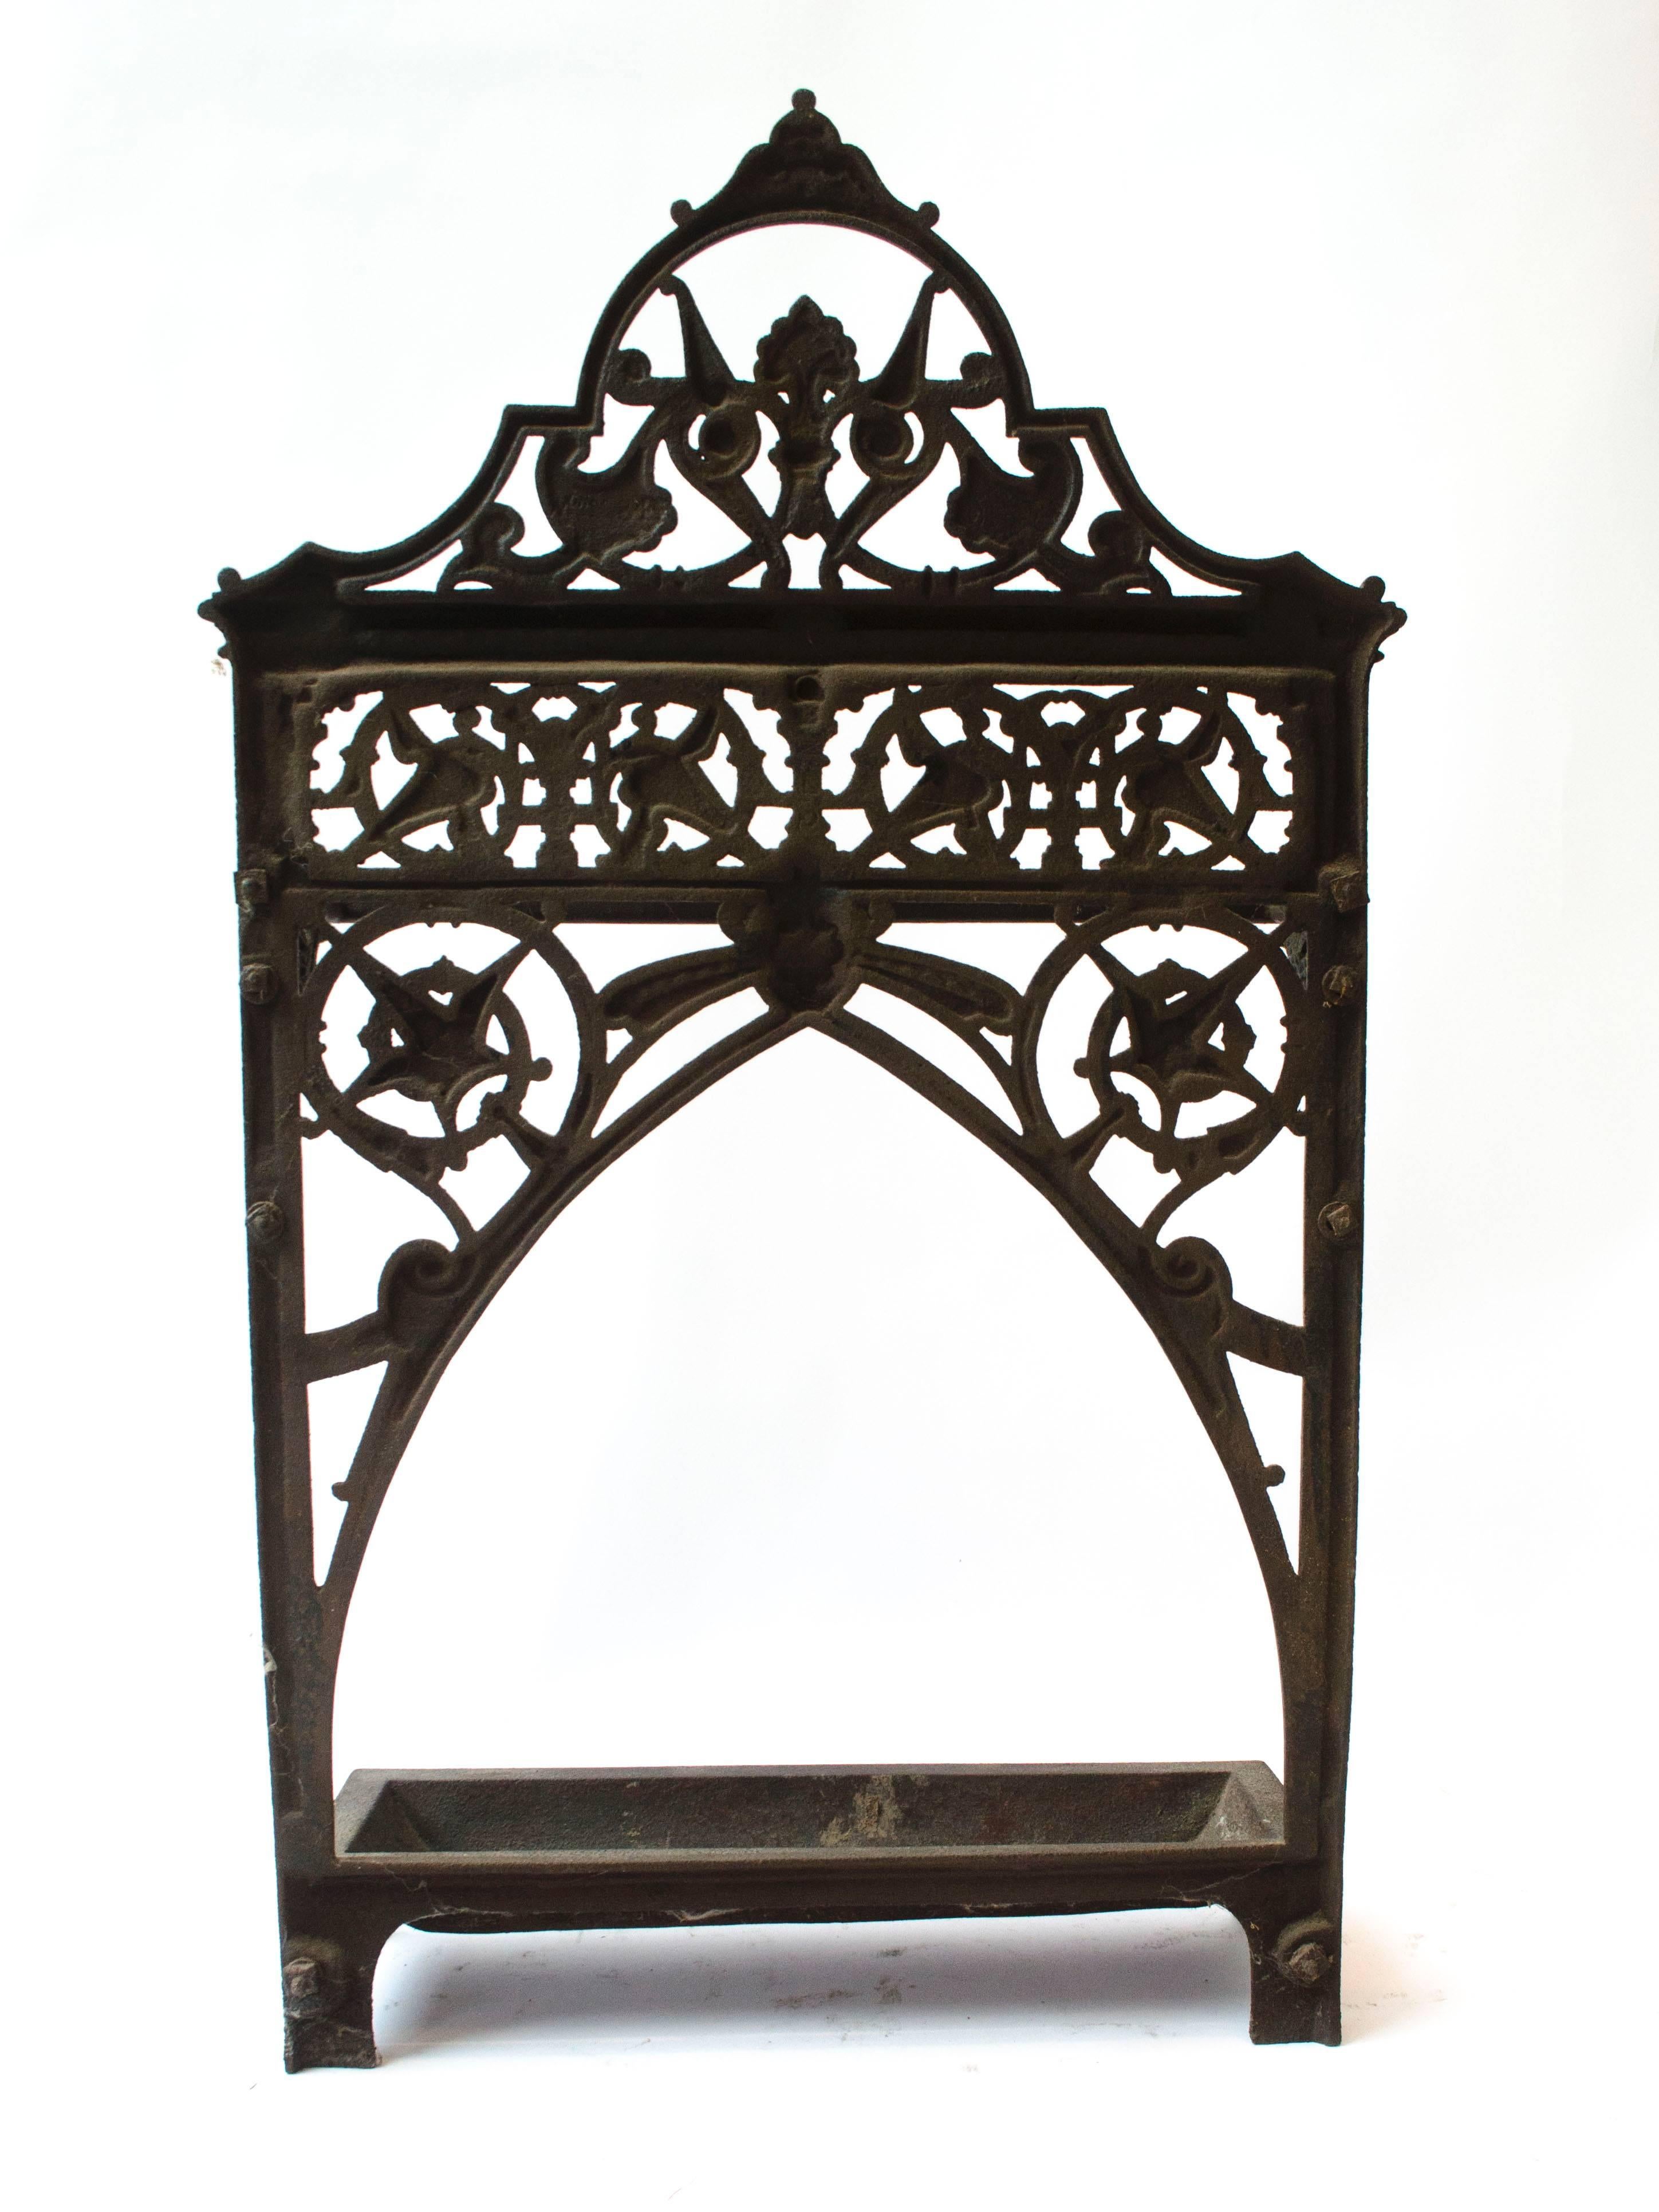 Dr C Dresser An Aesthetic Movement Cast Iron Stick Stand with stylised floral details. 
Made By Coalbrookdale Iron Works.
(The width is measured to the edges of the little lions paw feet).